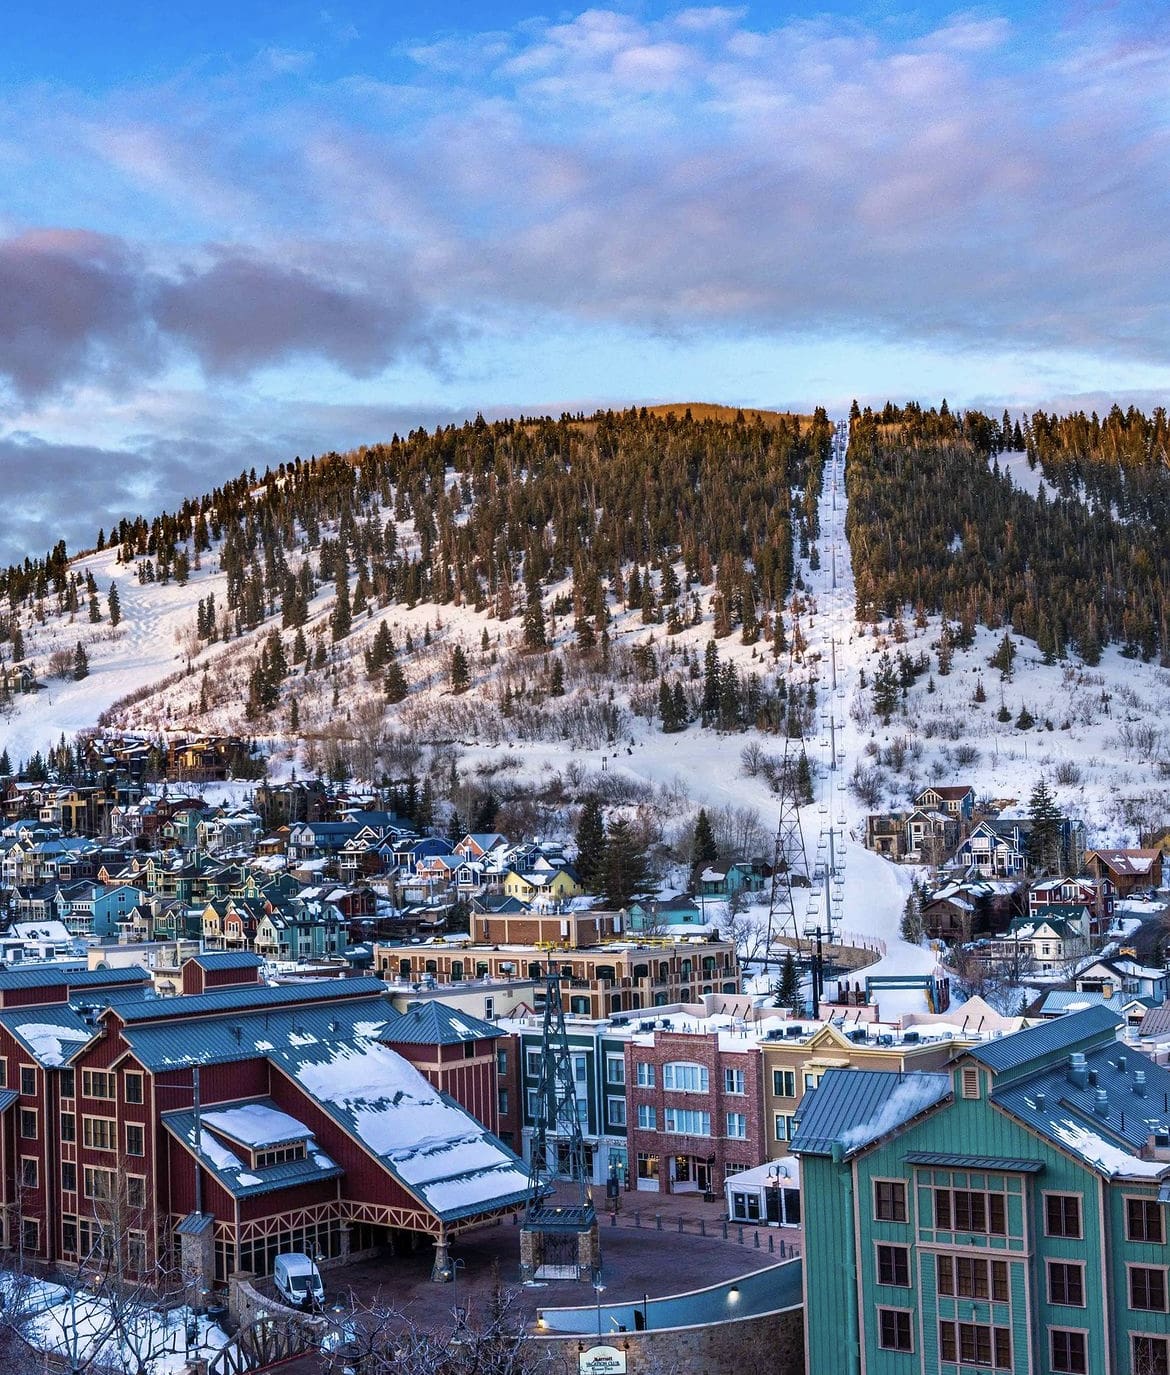 Park City, Utah - The 15 Top Ski Towns In The USA